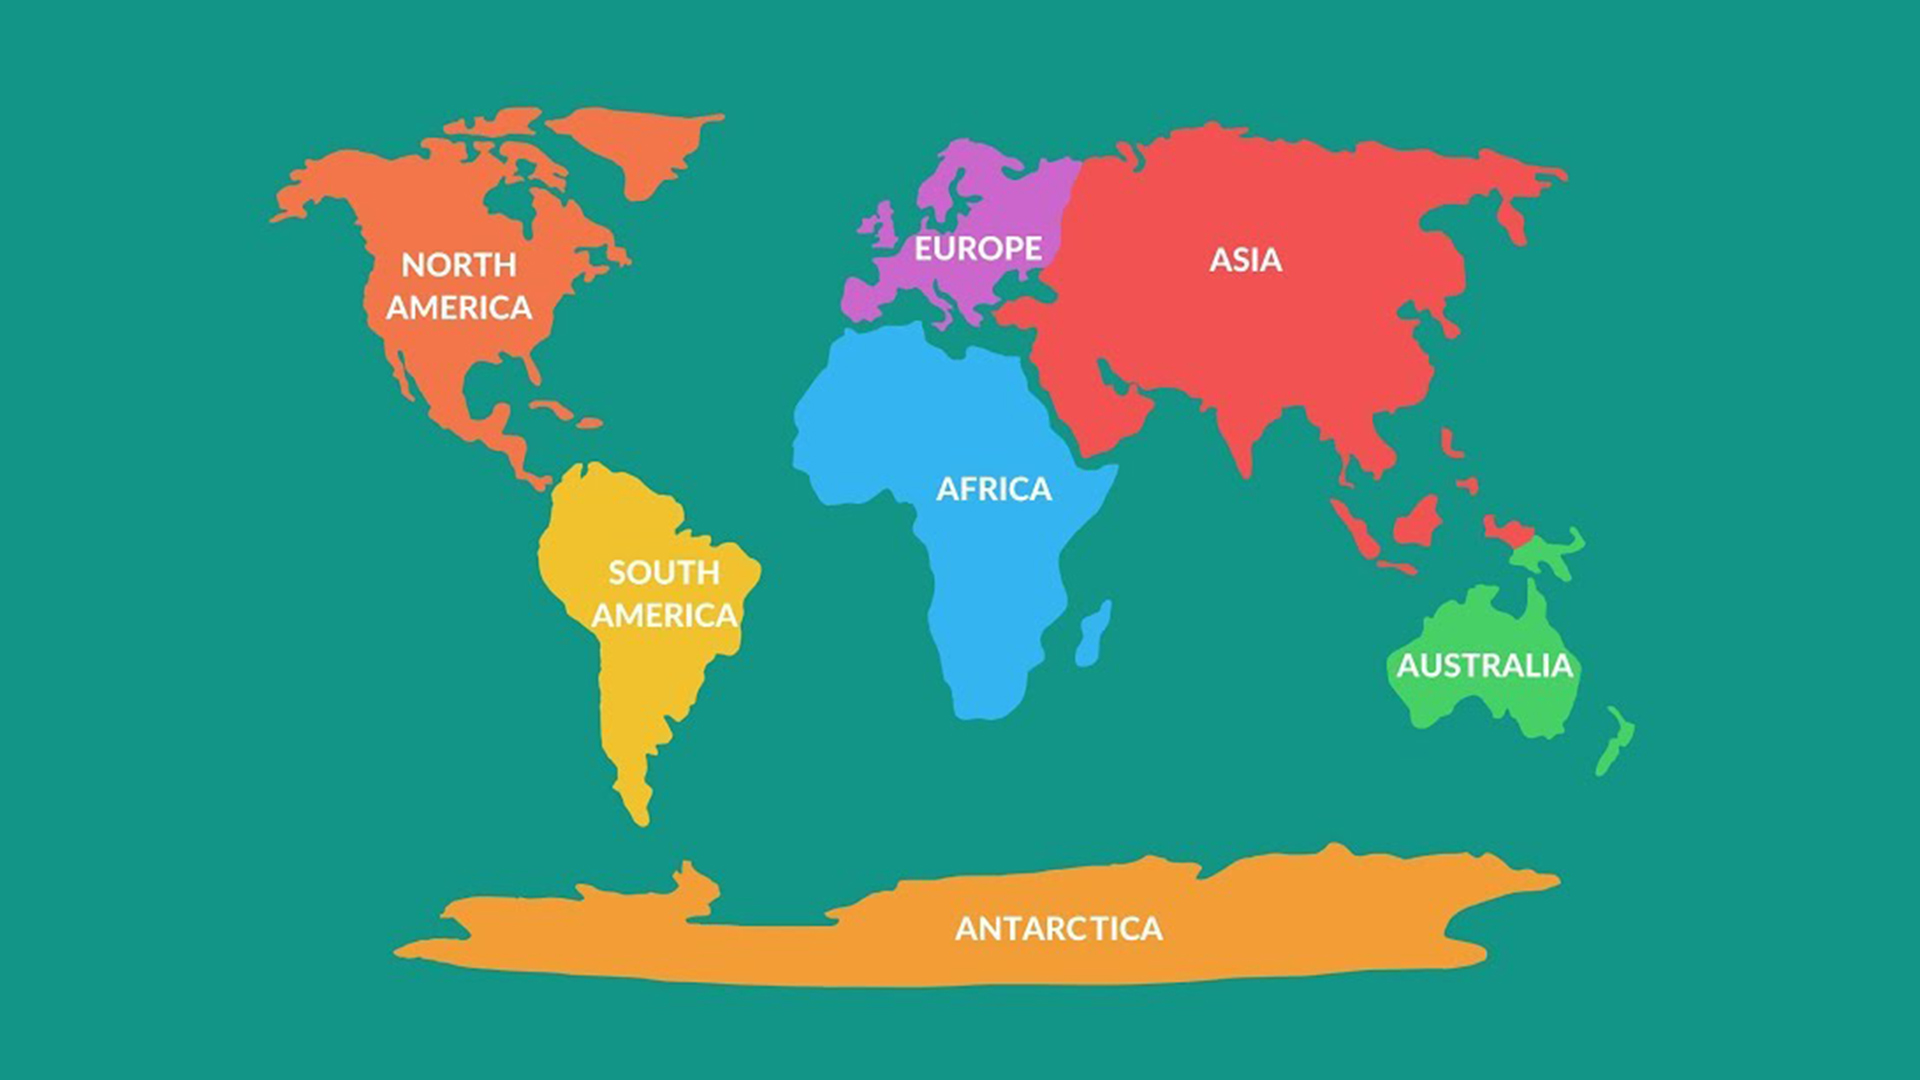 continents-and-oceans-facts-for-kids